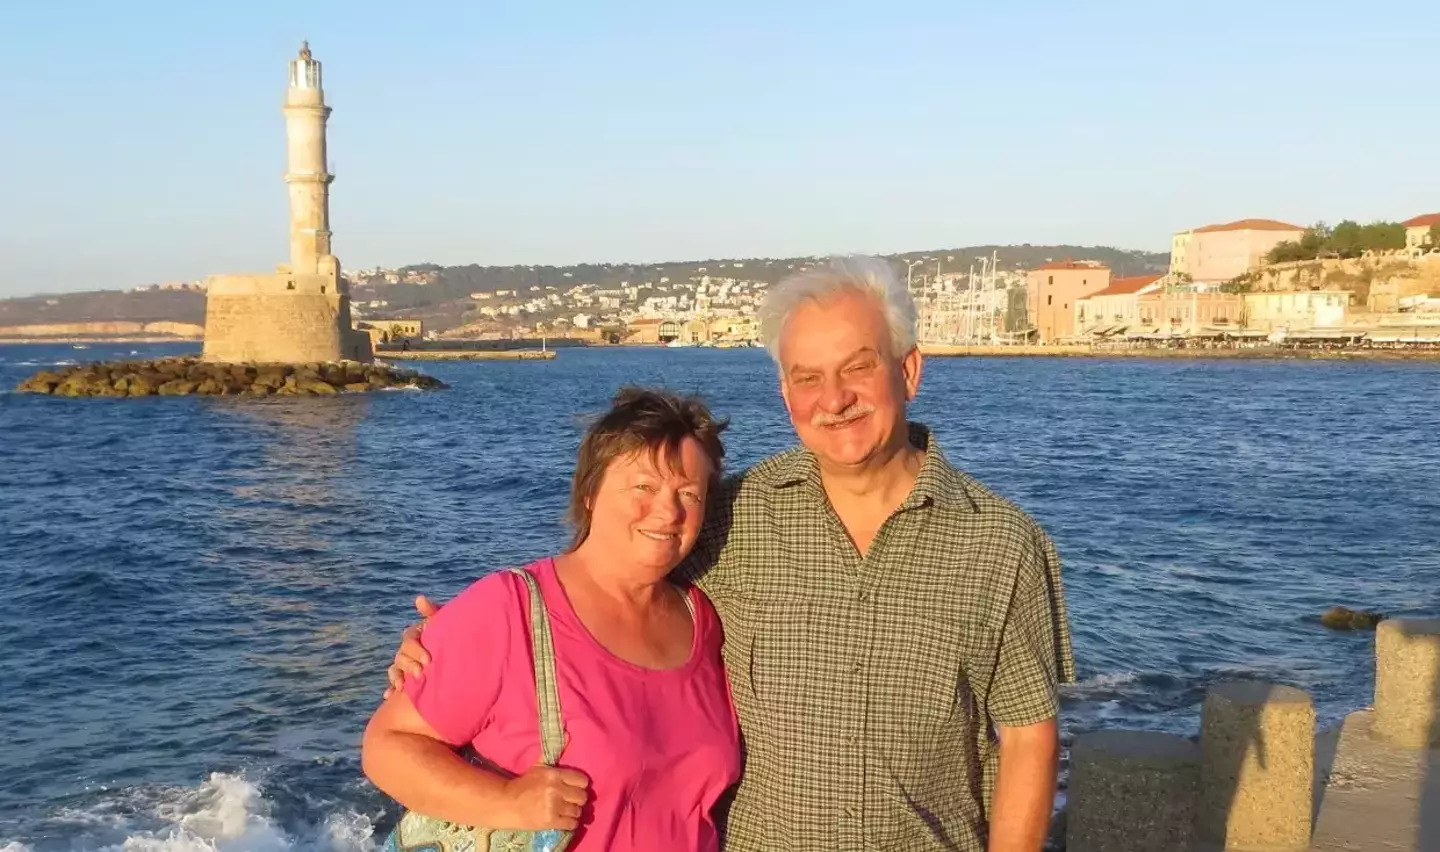 Heide and David were on holiday in Greece together when he went missing while on a hike.